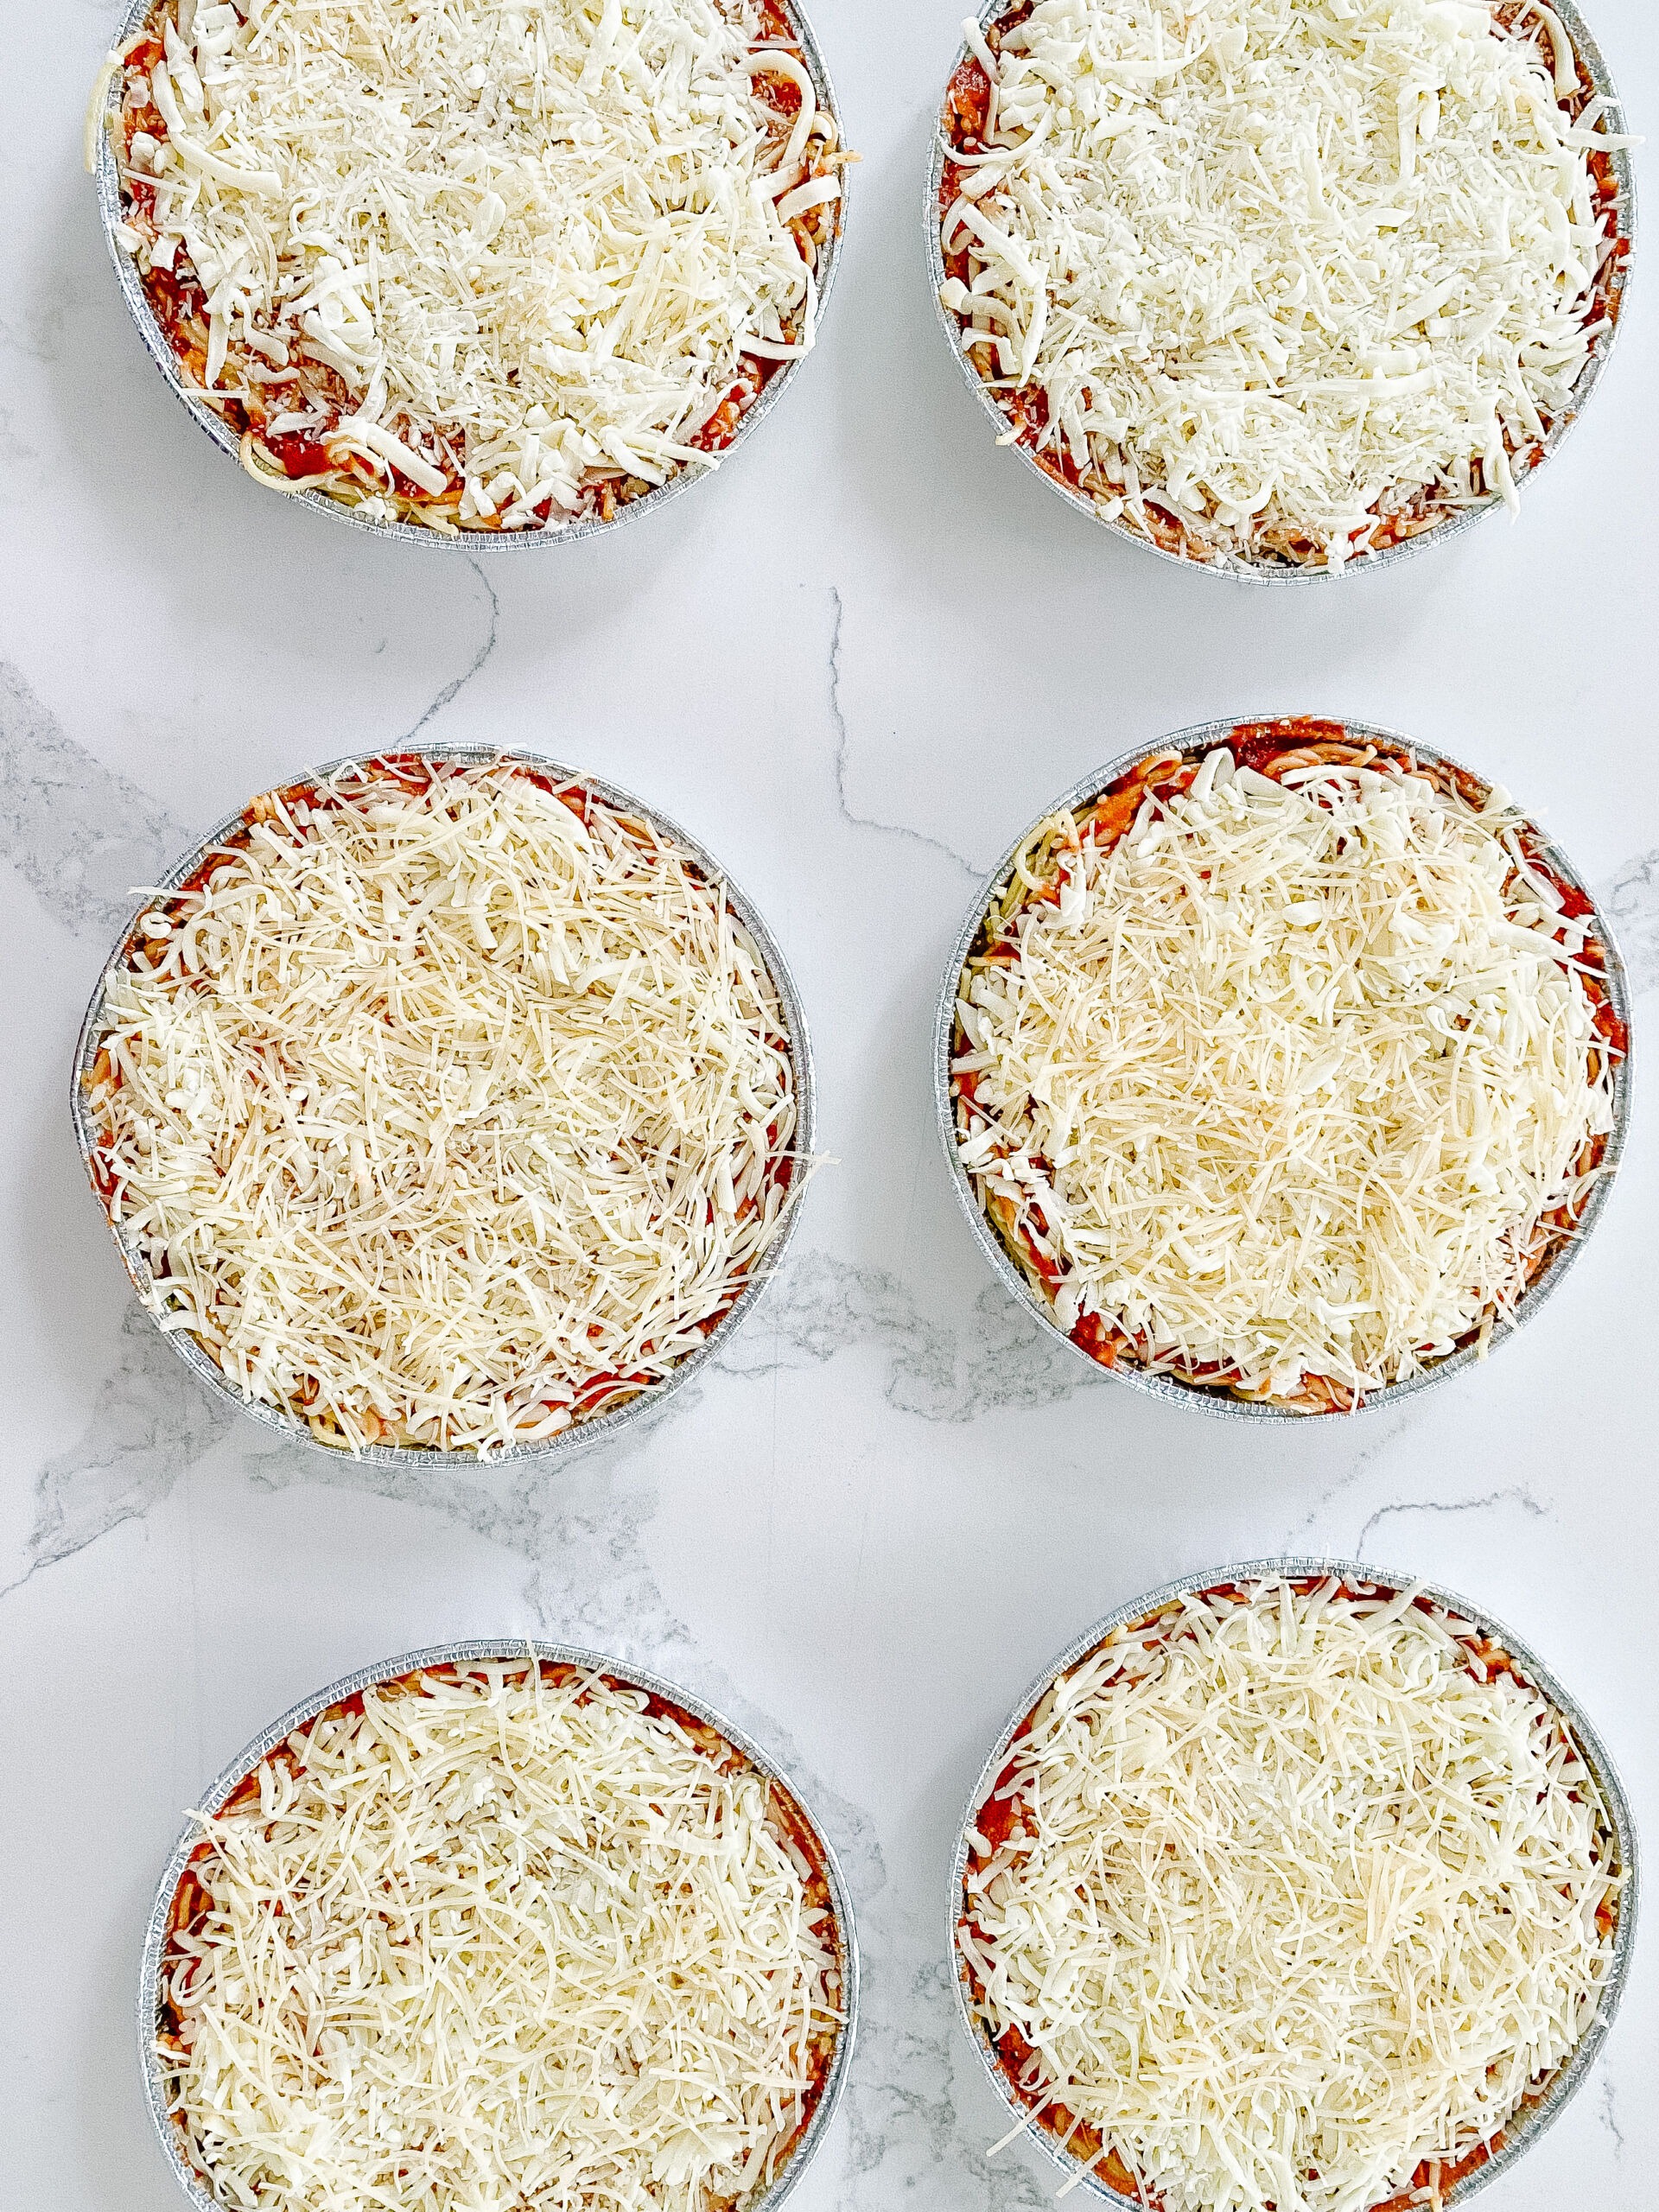 Baked Spaghetti (Easy Freezer Meal to Bring to Others)